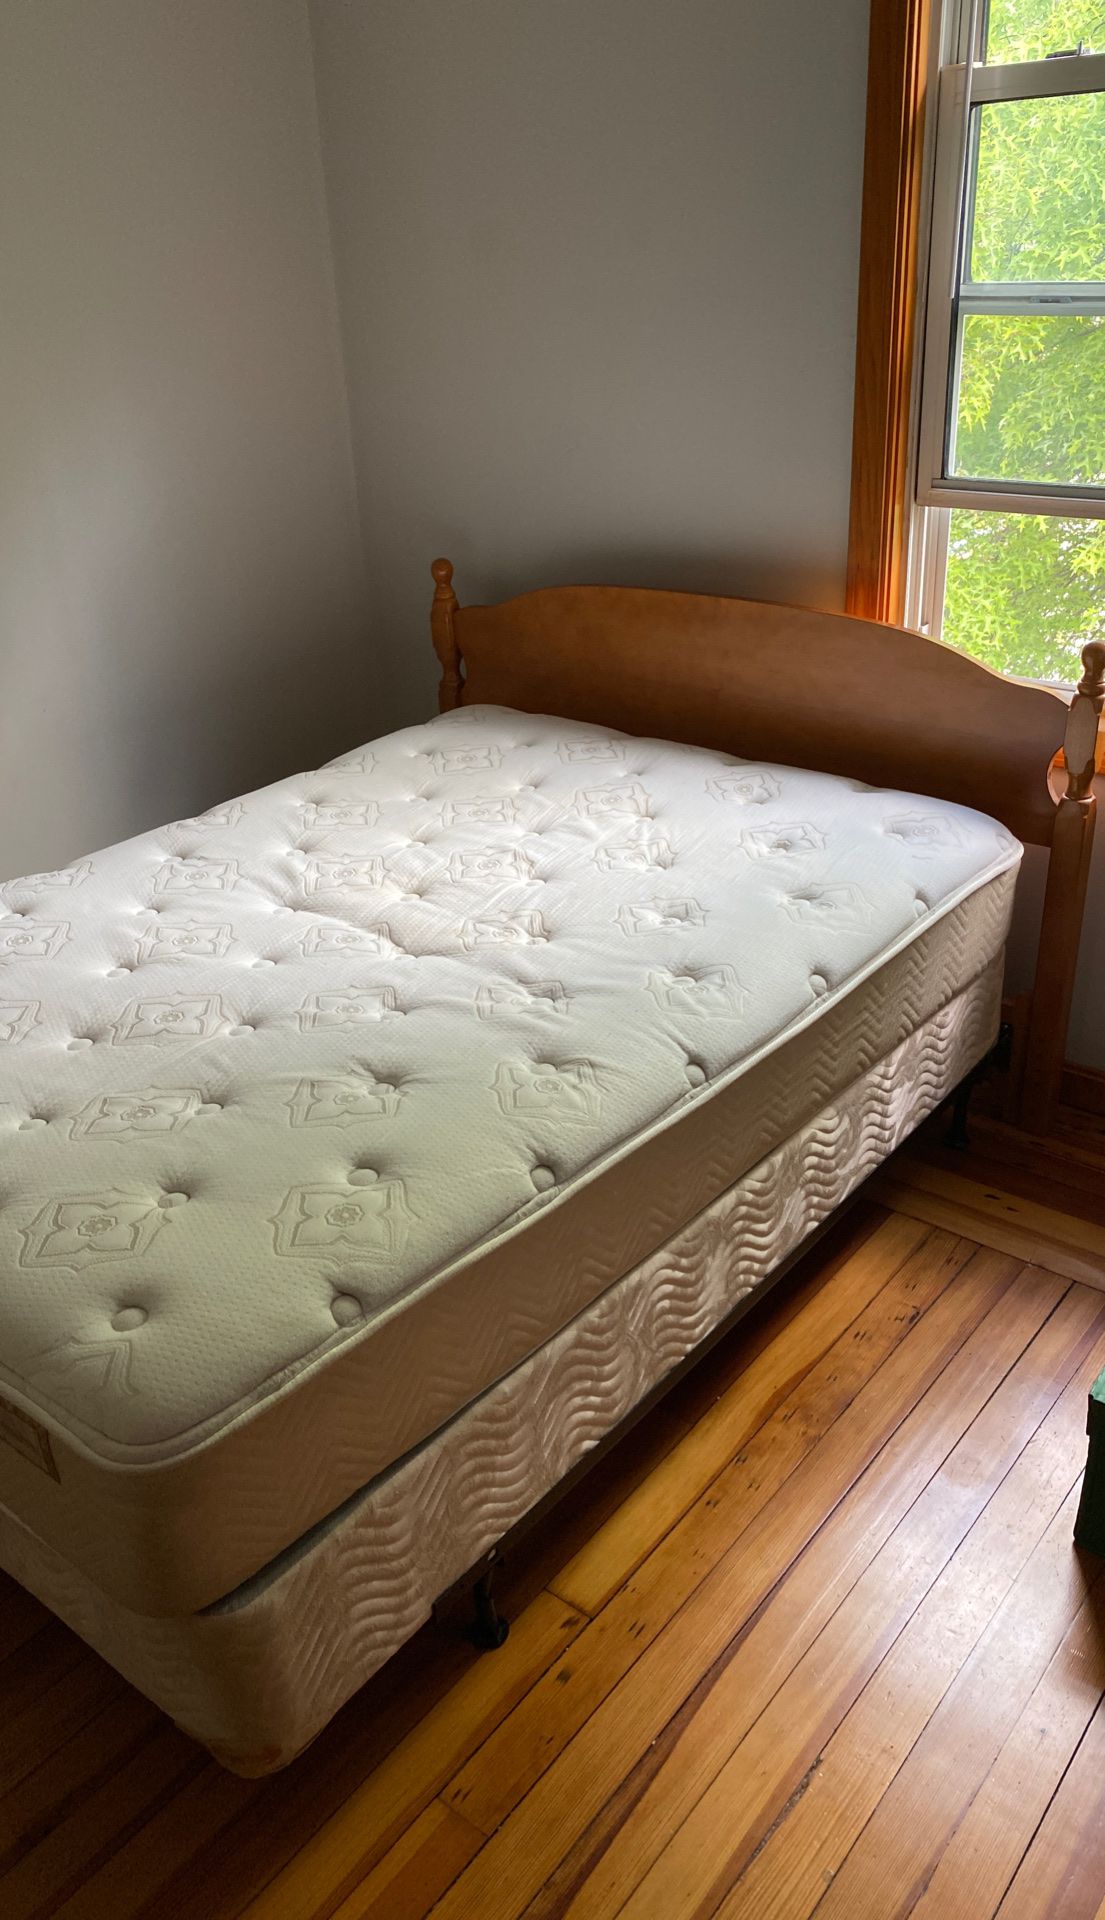 Used mattress, box spring, bed frame